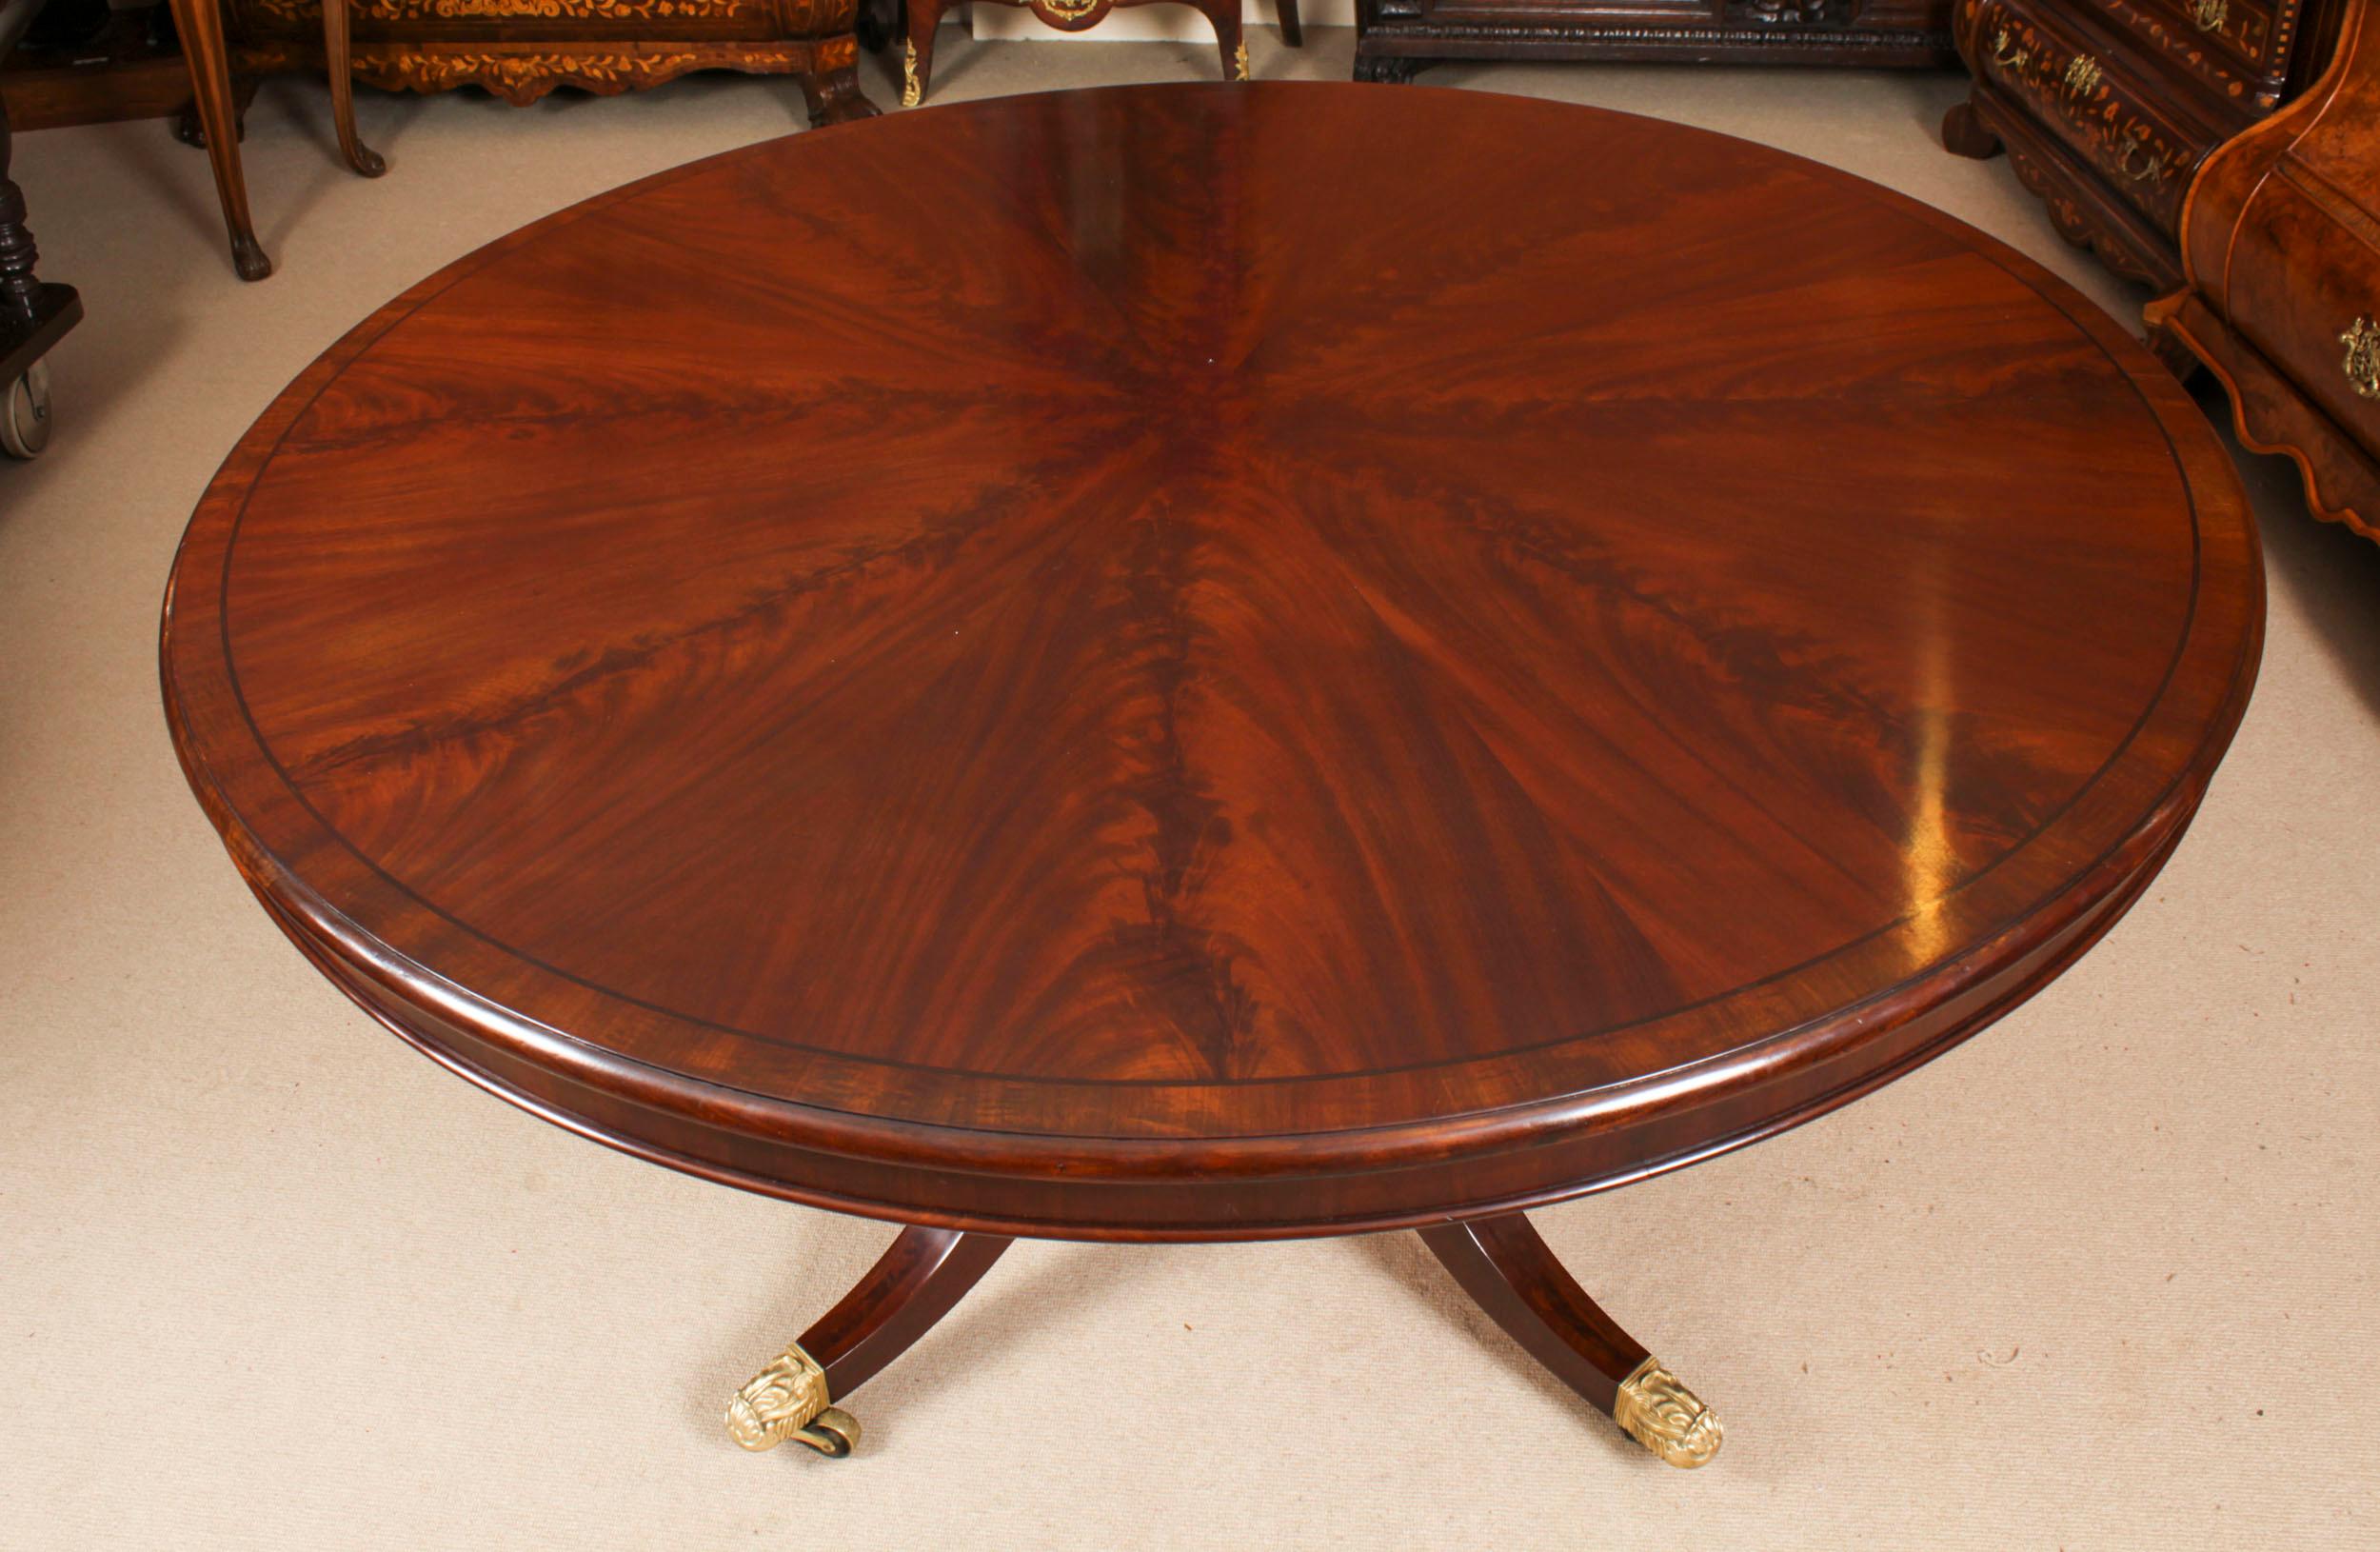 Mahogany Antique William IV Loo Breakfast Dining Table c.1830 19th C For Sale